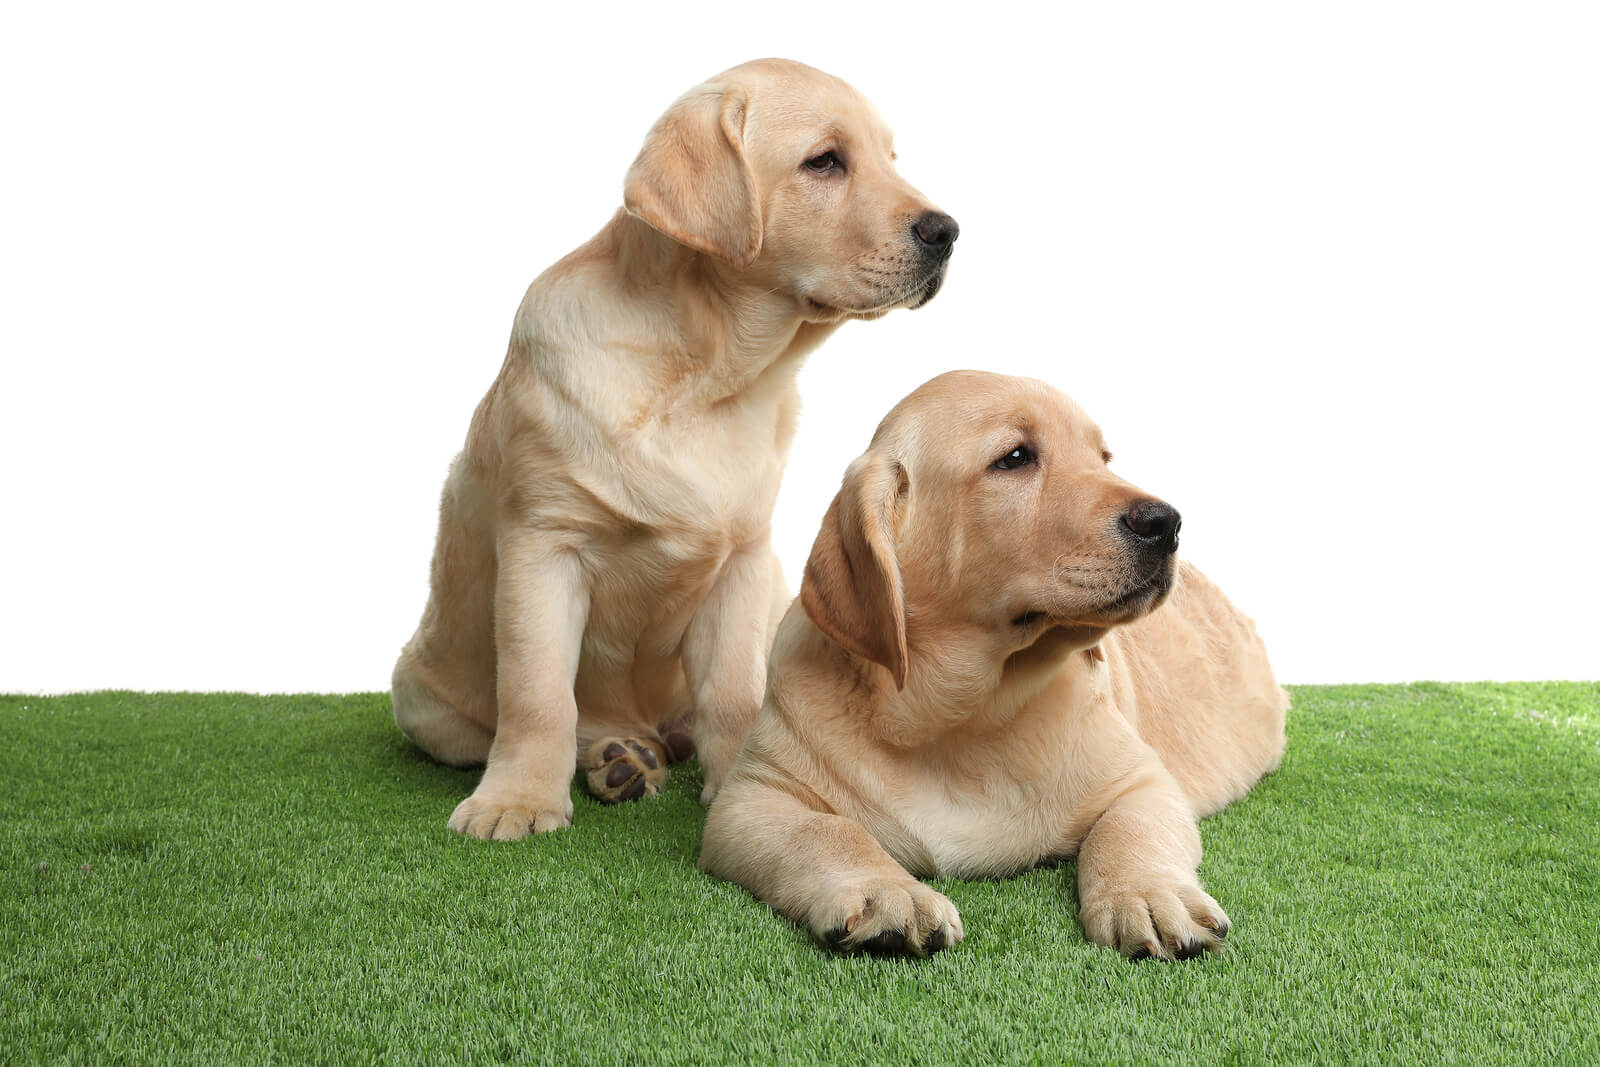 Cute yellow labrador retriever puppies on artificial grass against white background